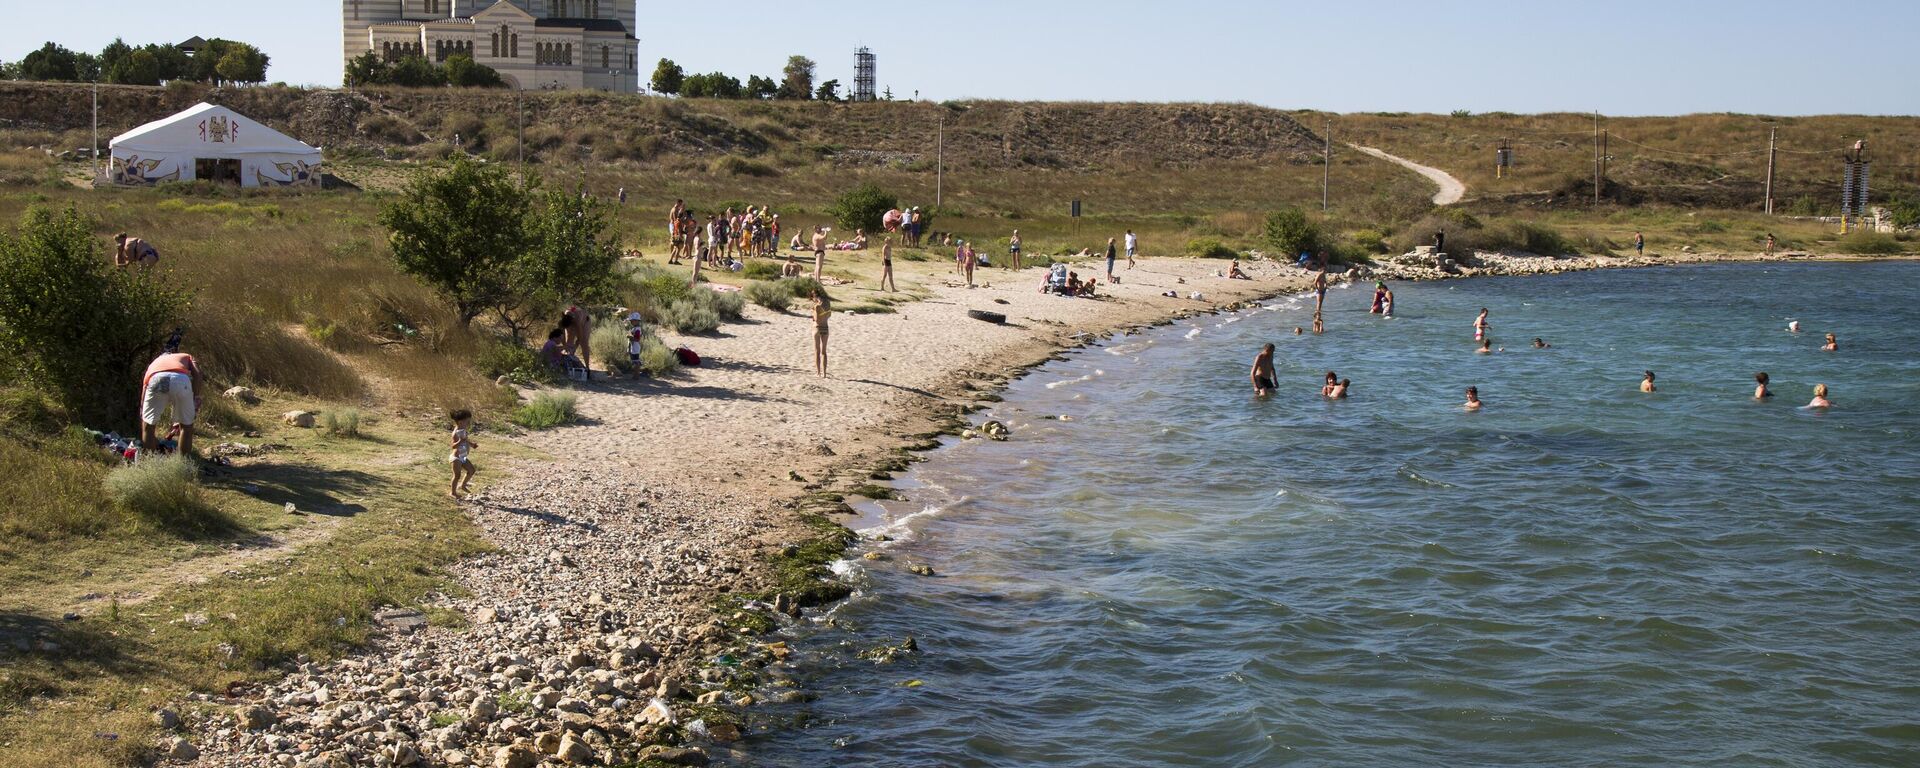 In this photo taken on Friday, Aug.  7, 2015, people gather at the beach area of the Black Sea, near to the area that was the ancient Greek colony of Chersonesus, and with the St. Vladimir's Cathedral in the background, just outside Sevastopol, the main port city in Crimea, the Black Sea Peninsula .  - Sputnik International, 1920, 23.06.2024